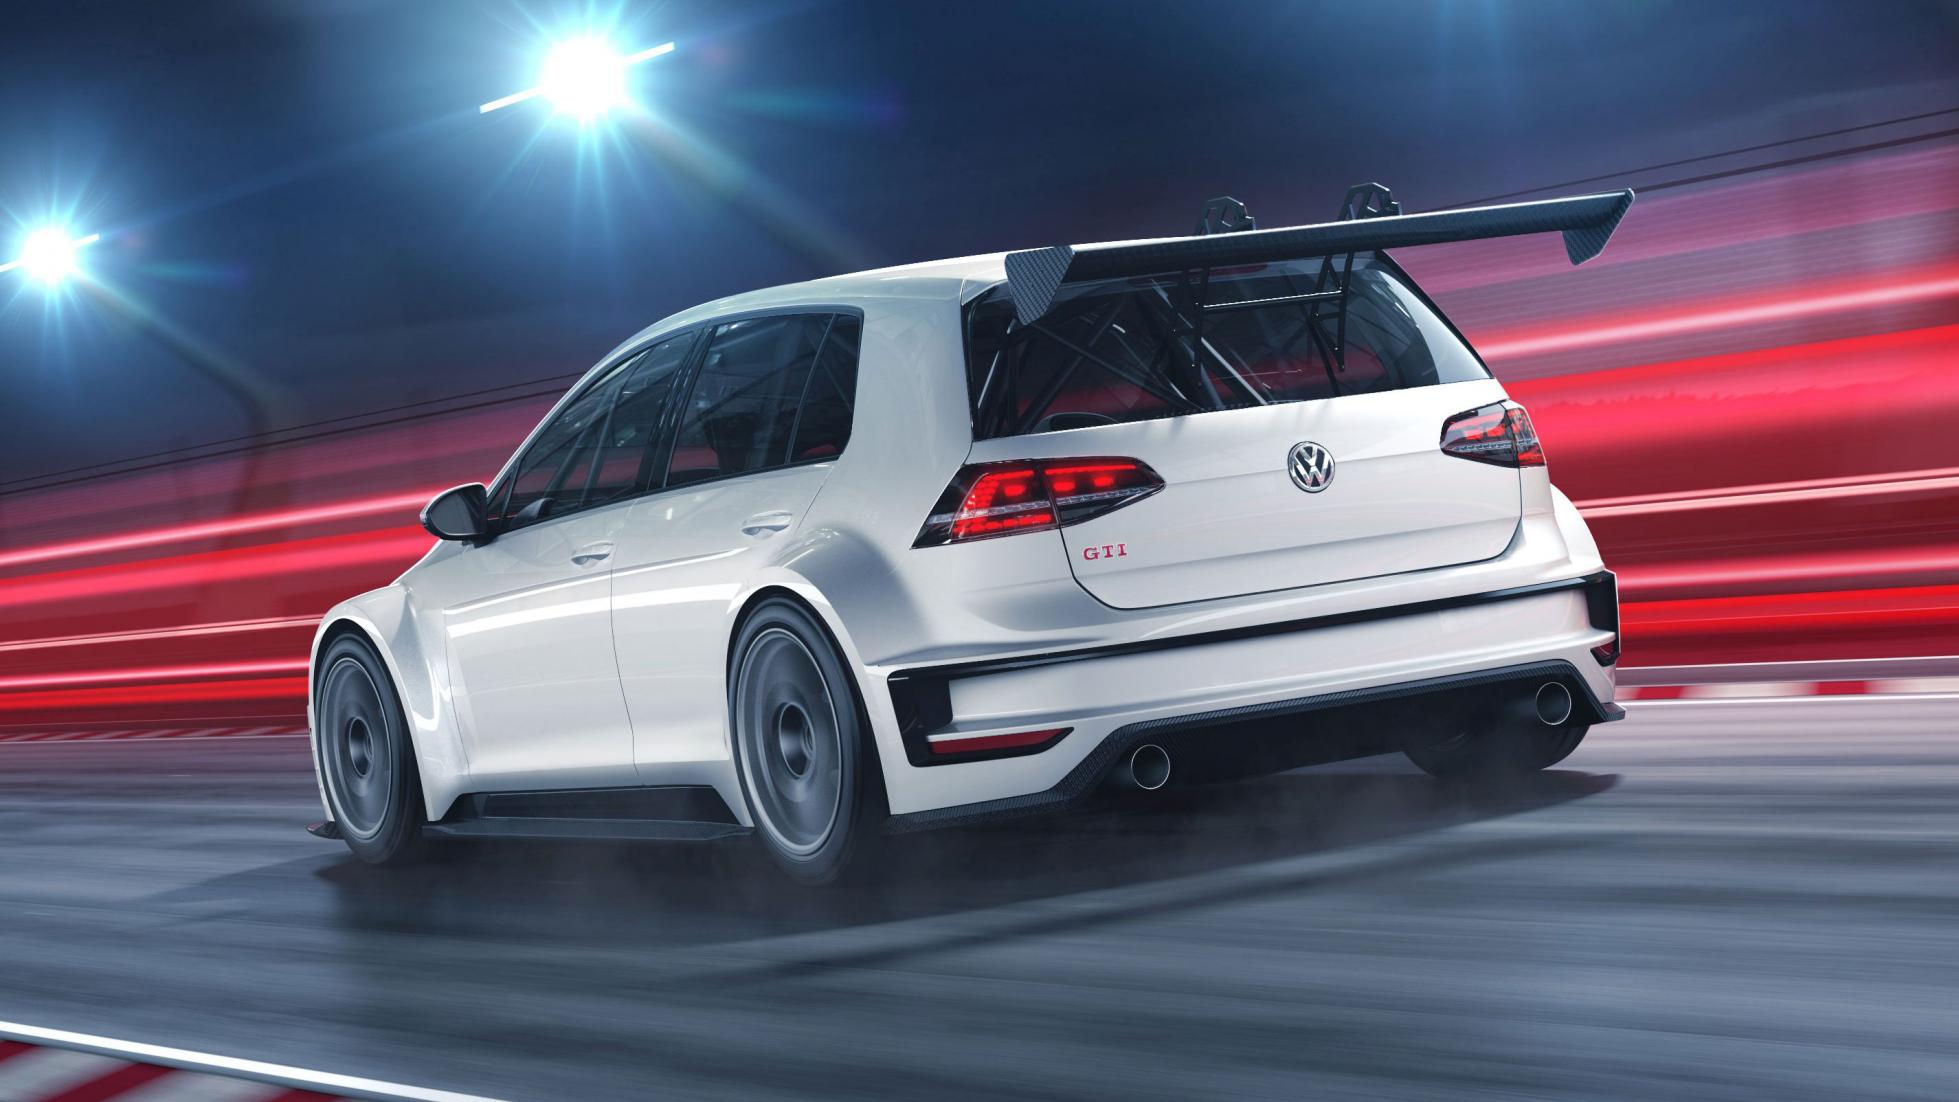 Volkswagen has dislayed Golf GTI TCR a track based car